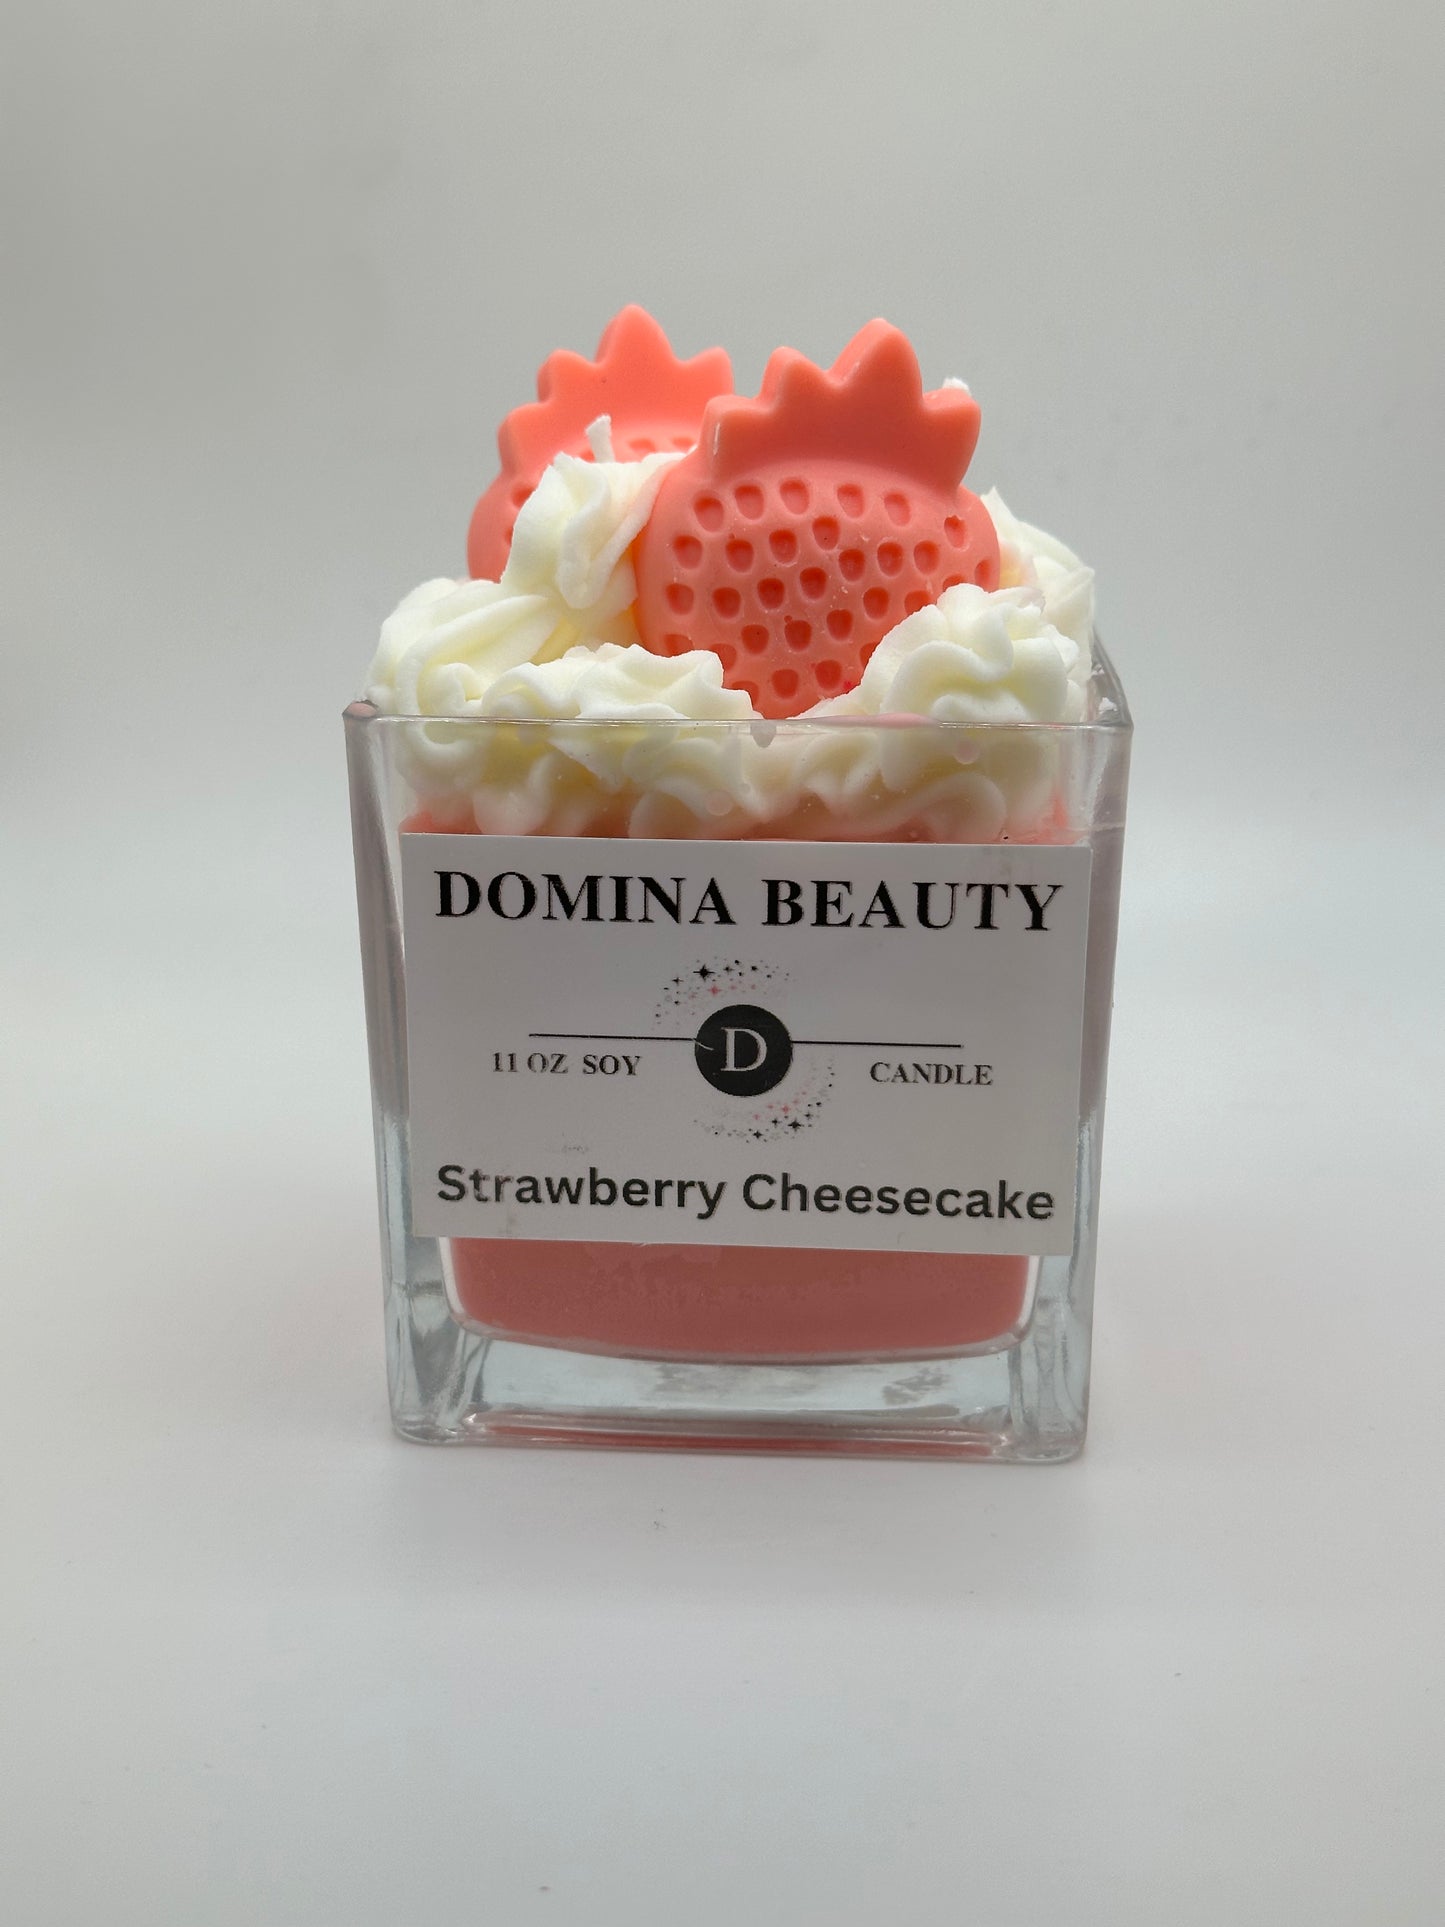 Strawberry Cheesecake Specialty Candle